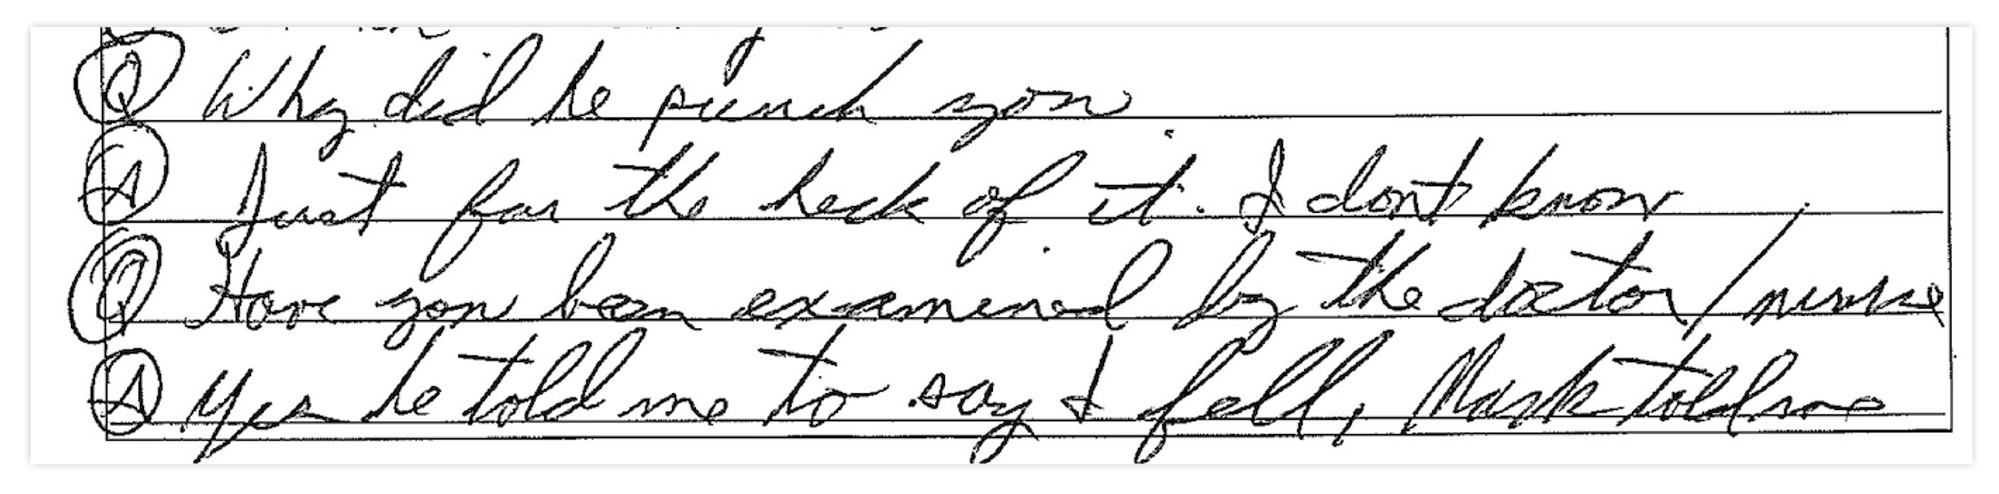 Handwritten text: Q: Why did he punch you? A: Just for the heck of it. I don't know. Q: Have you been examined by the doctor/nurse? A: Yes he told me to say I fell, Mark told me.